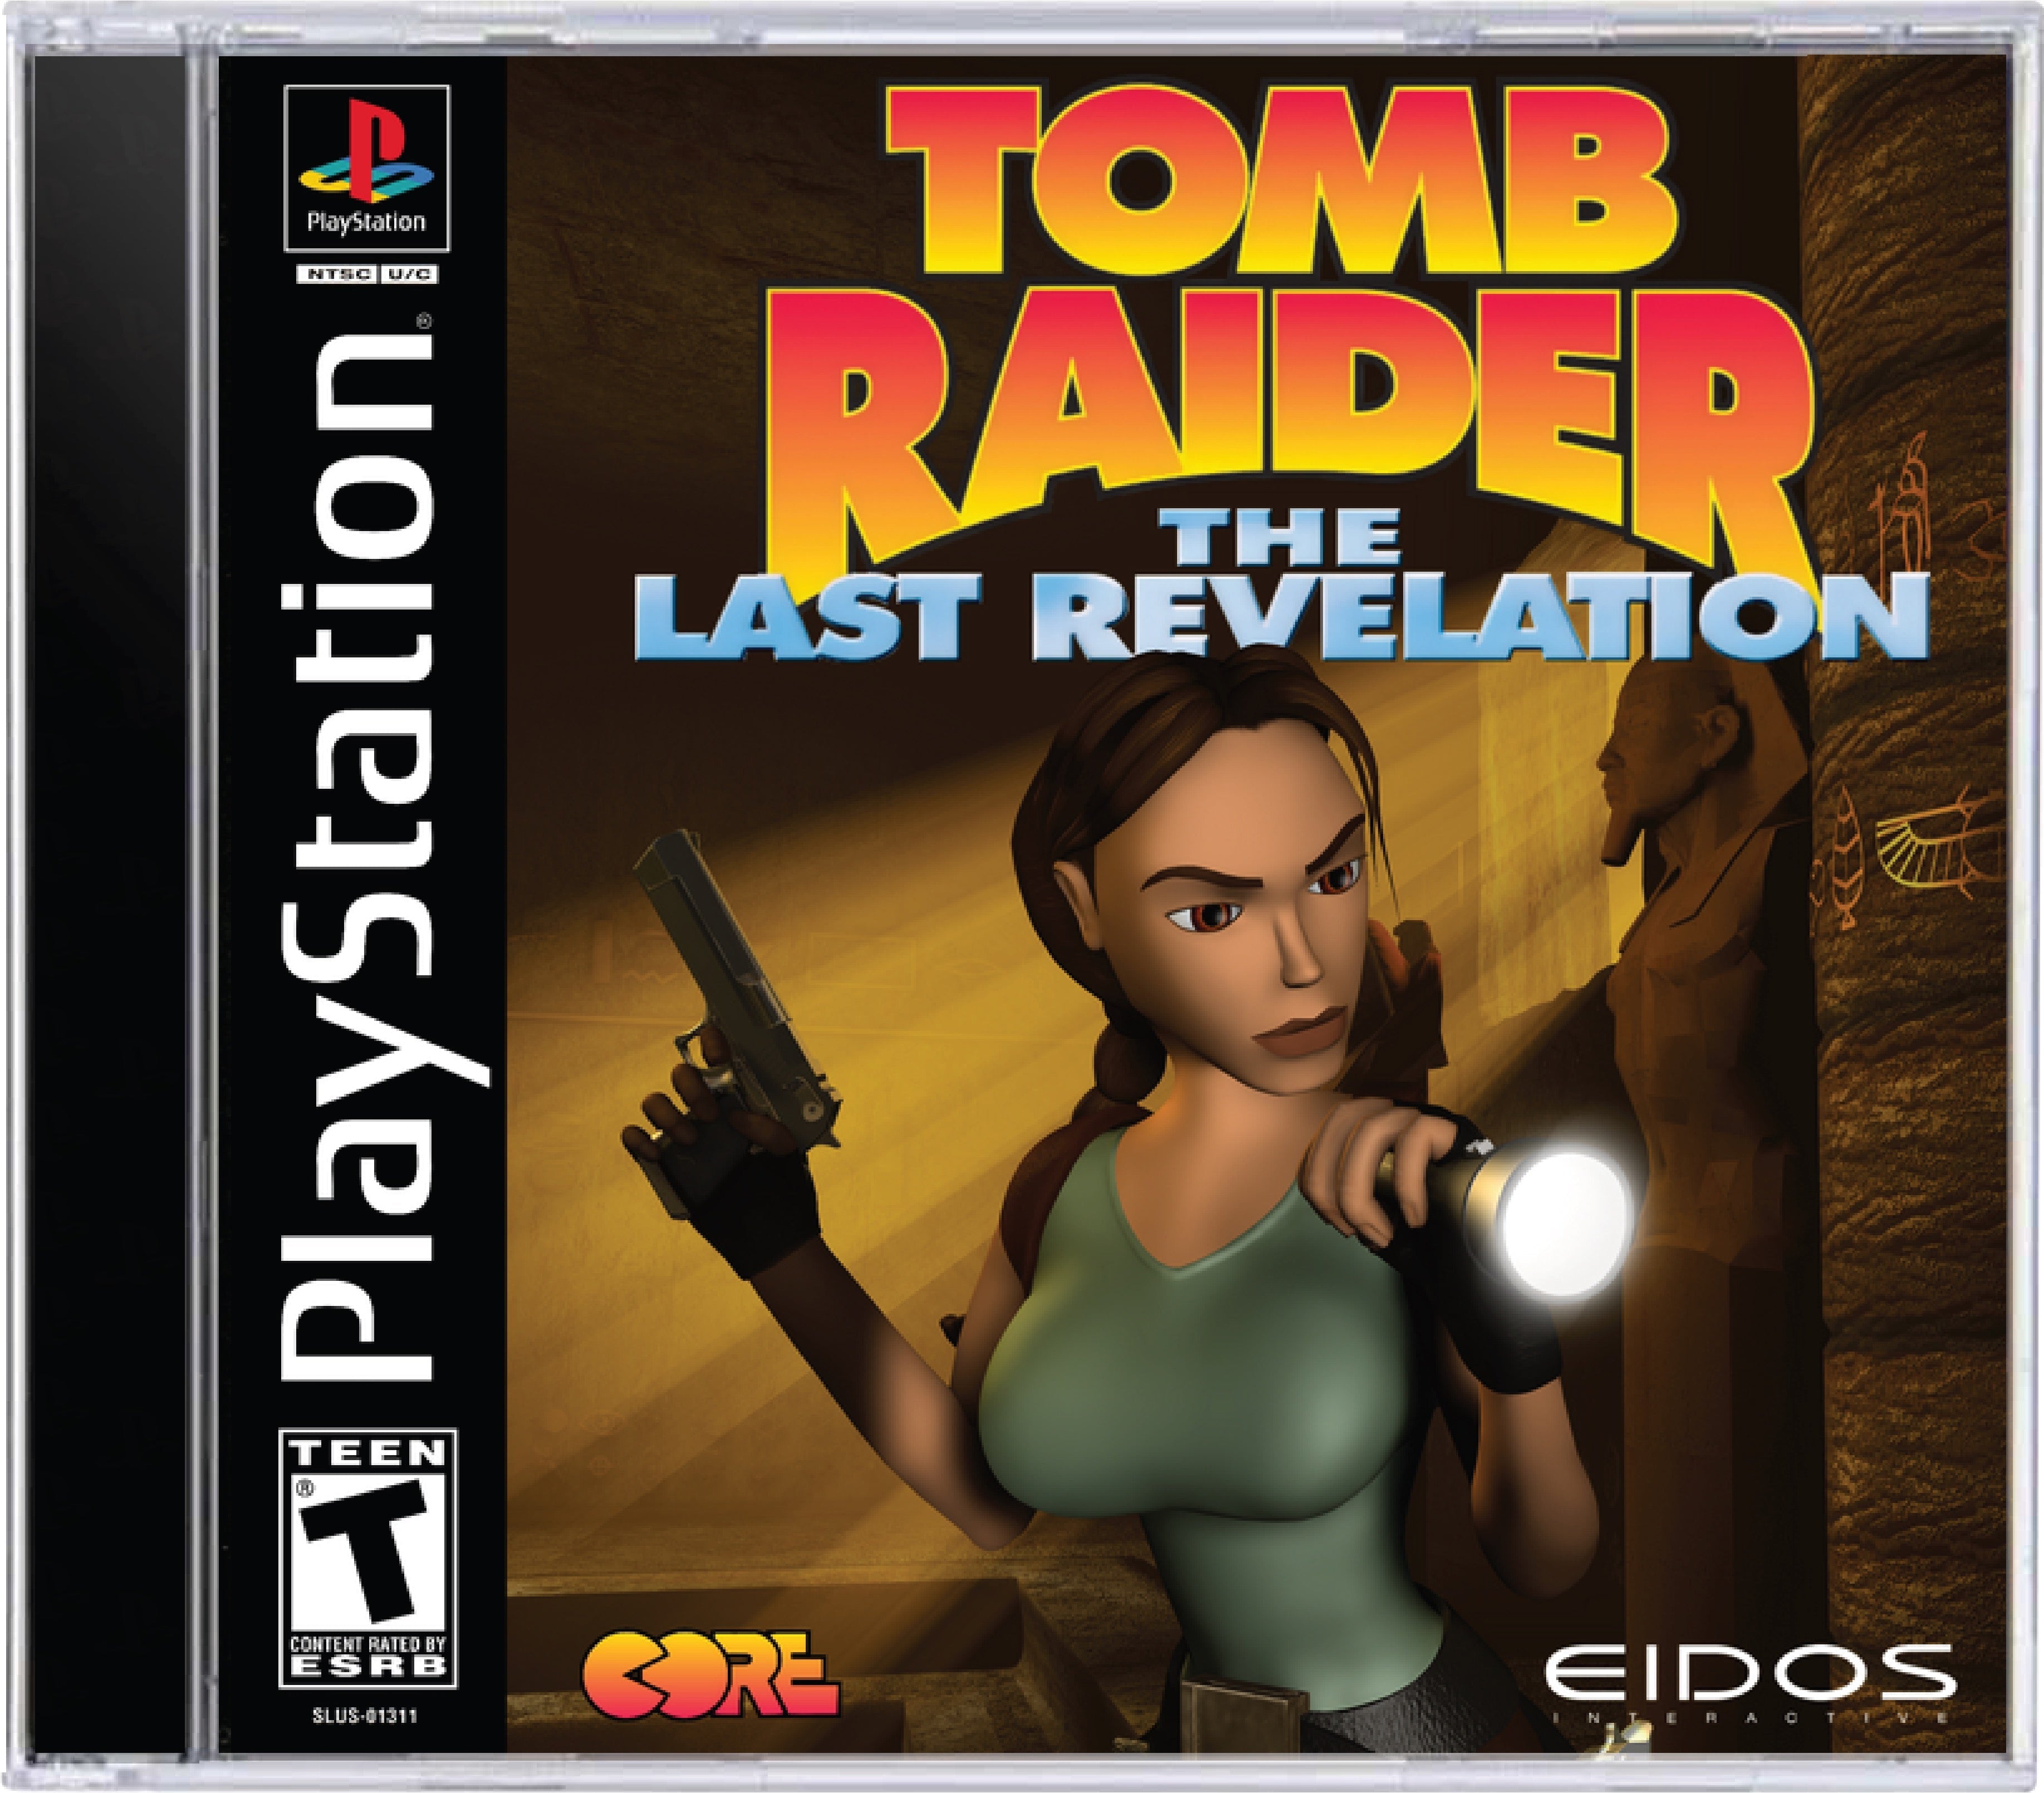 Tomb Raider Last Revelation Cover Art and Product Photo